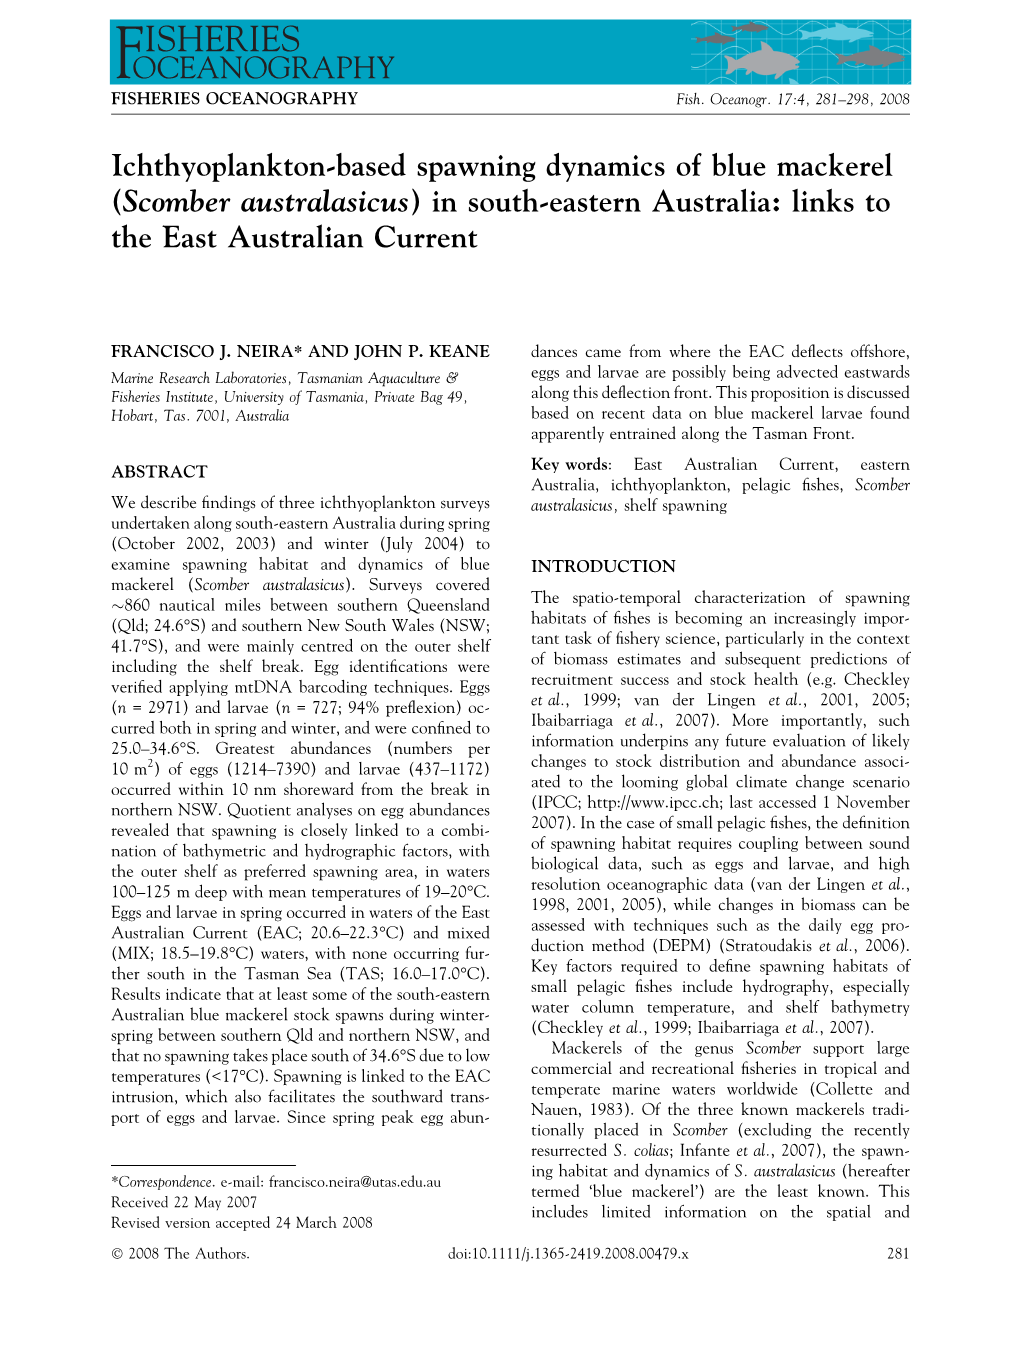 Ichthyoplankton-Based Spawning Dynamics of Blue Mackerel (Scomber Australasicus) in South-Eastern Australia: Links to the East Australian Current